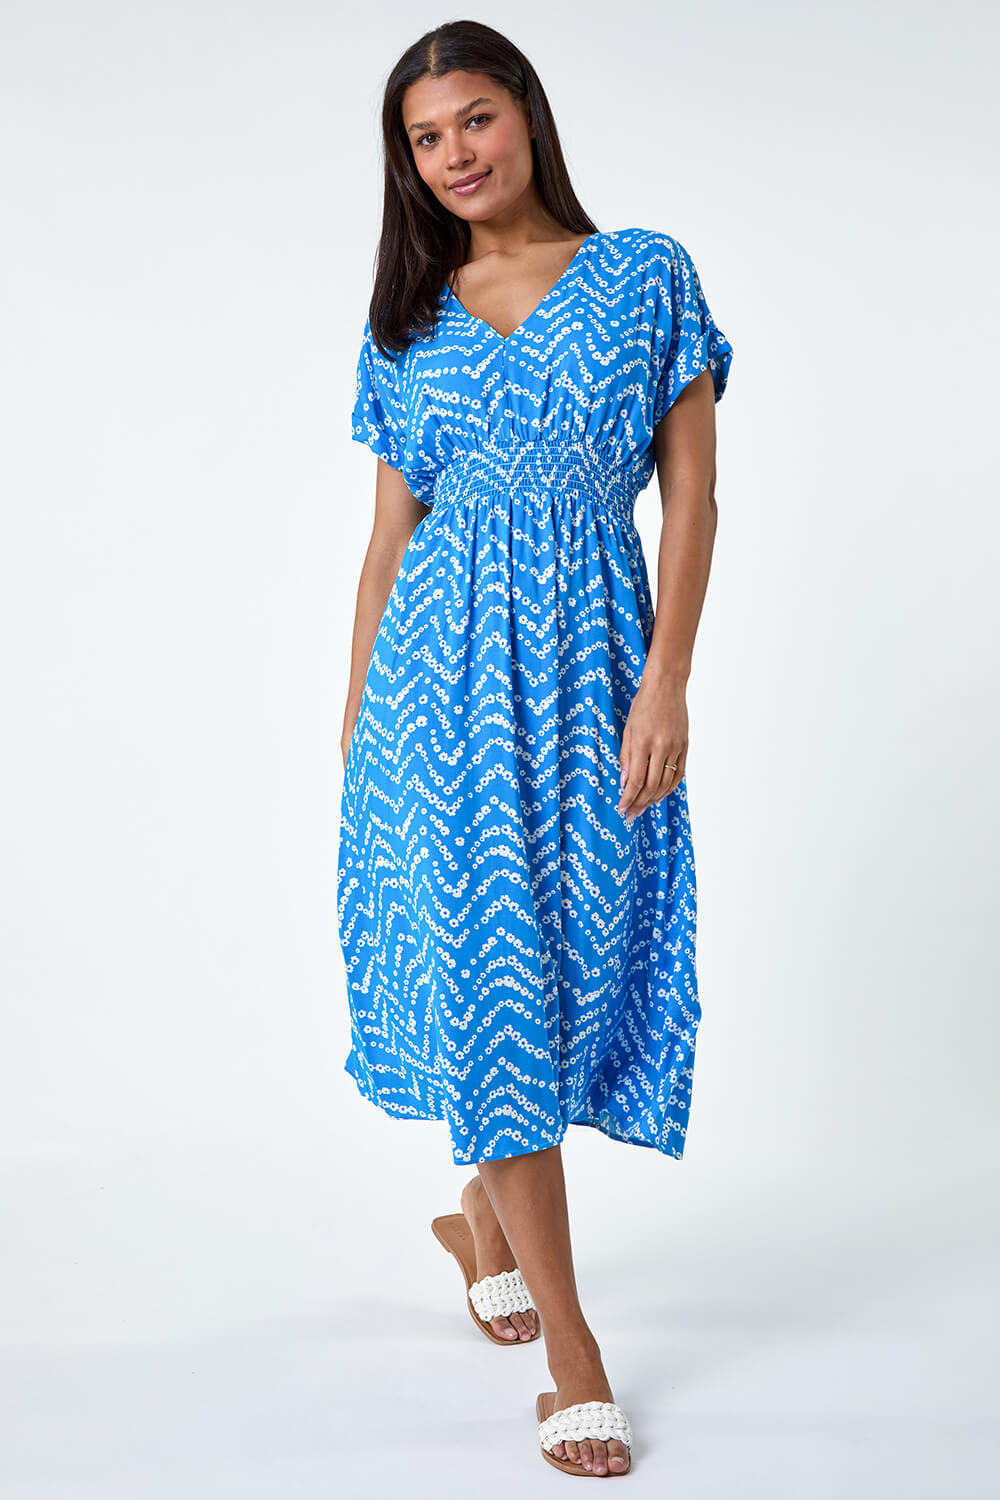 Blue Abstract Floral Zig Zag Print Midi Dress, Image 2 of 5